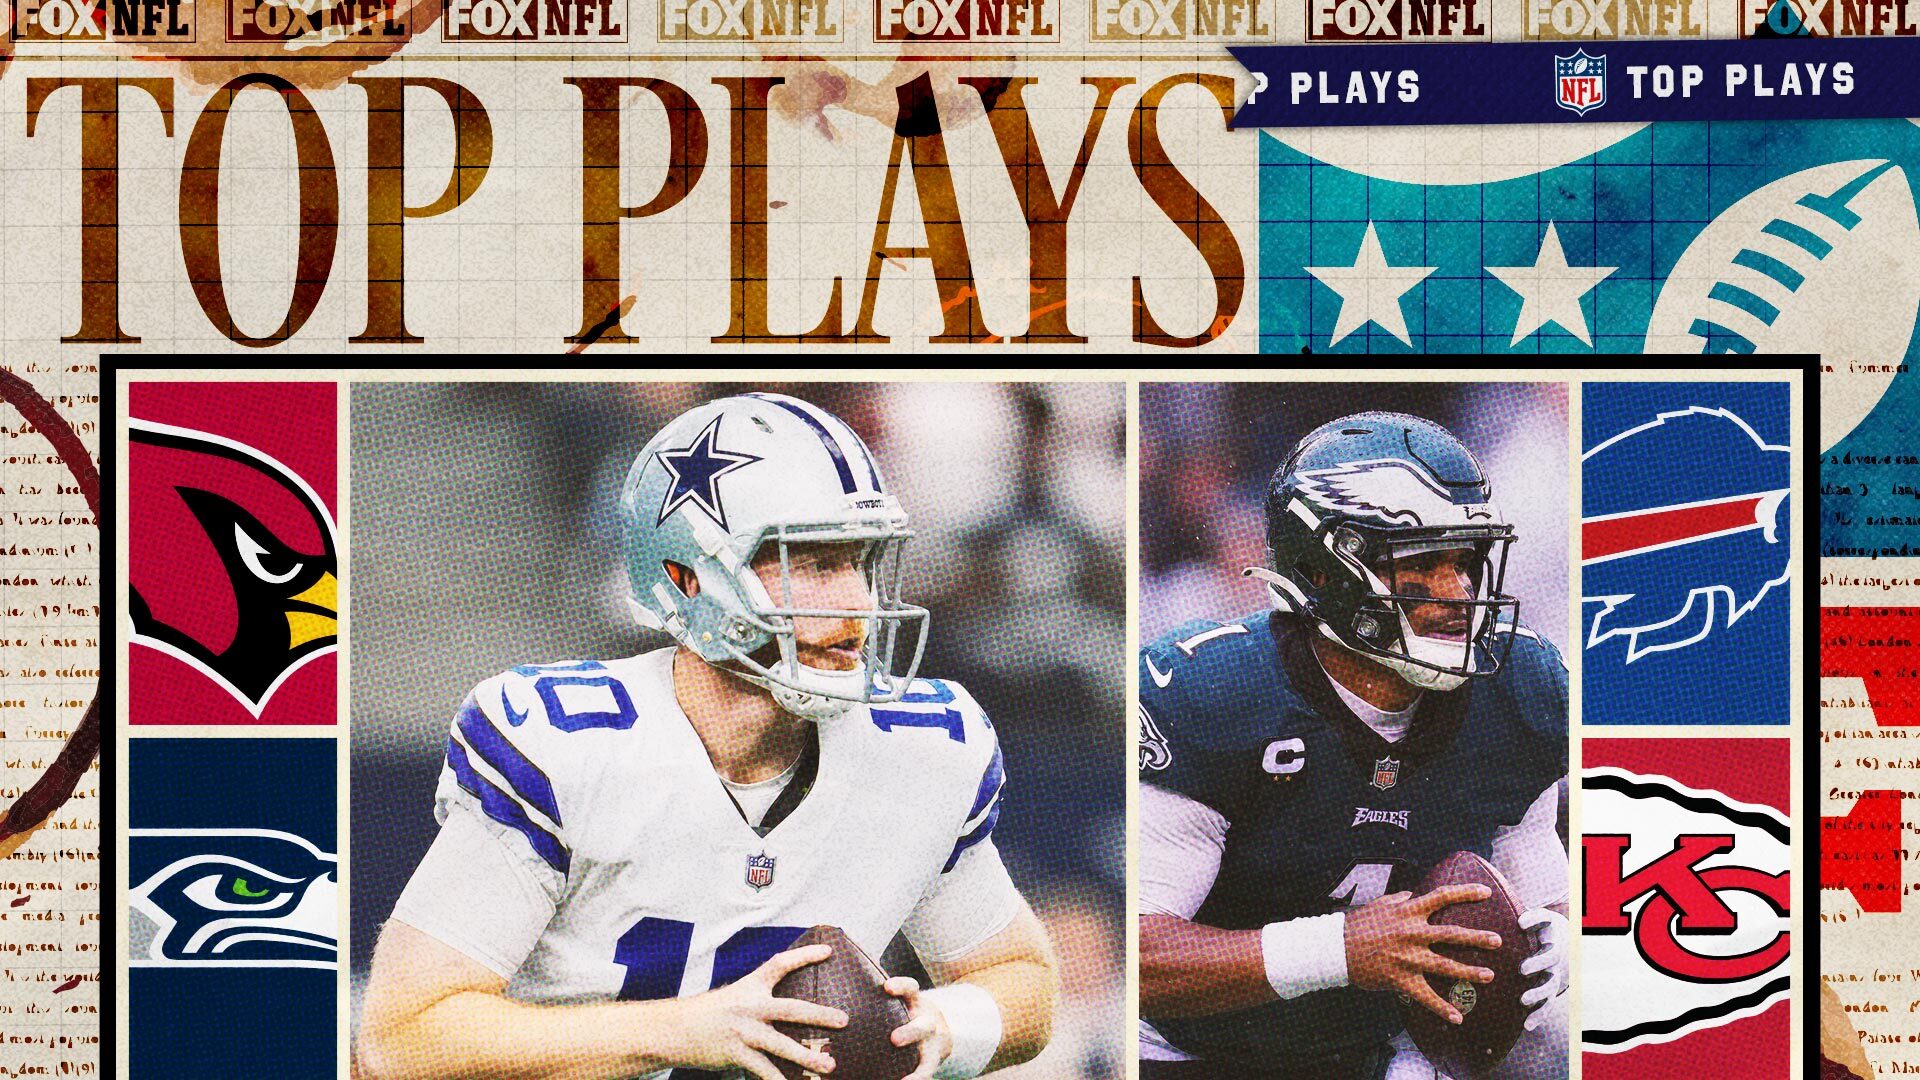 Eagles vs. Cowboys: Live blog and scoring drive updates for Week 16